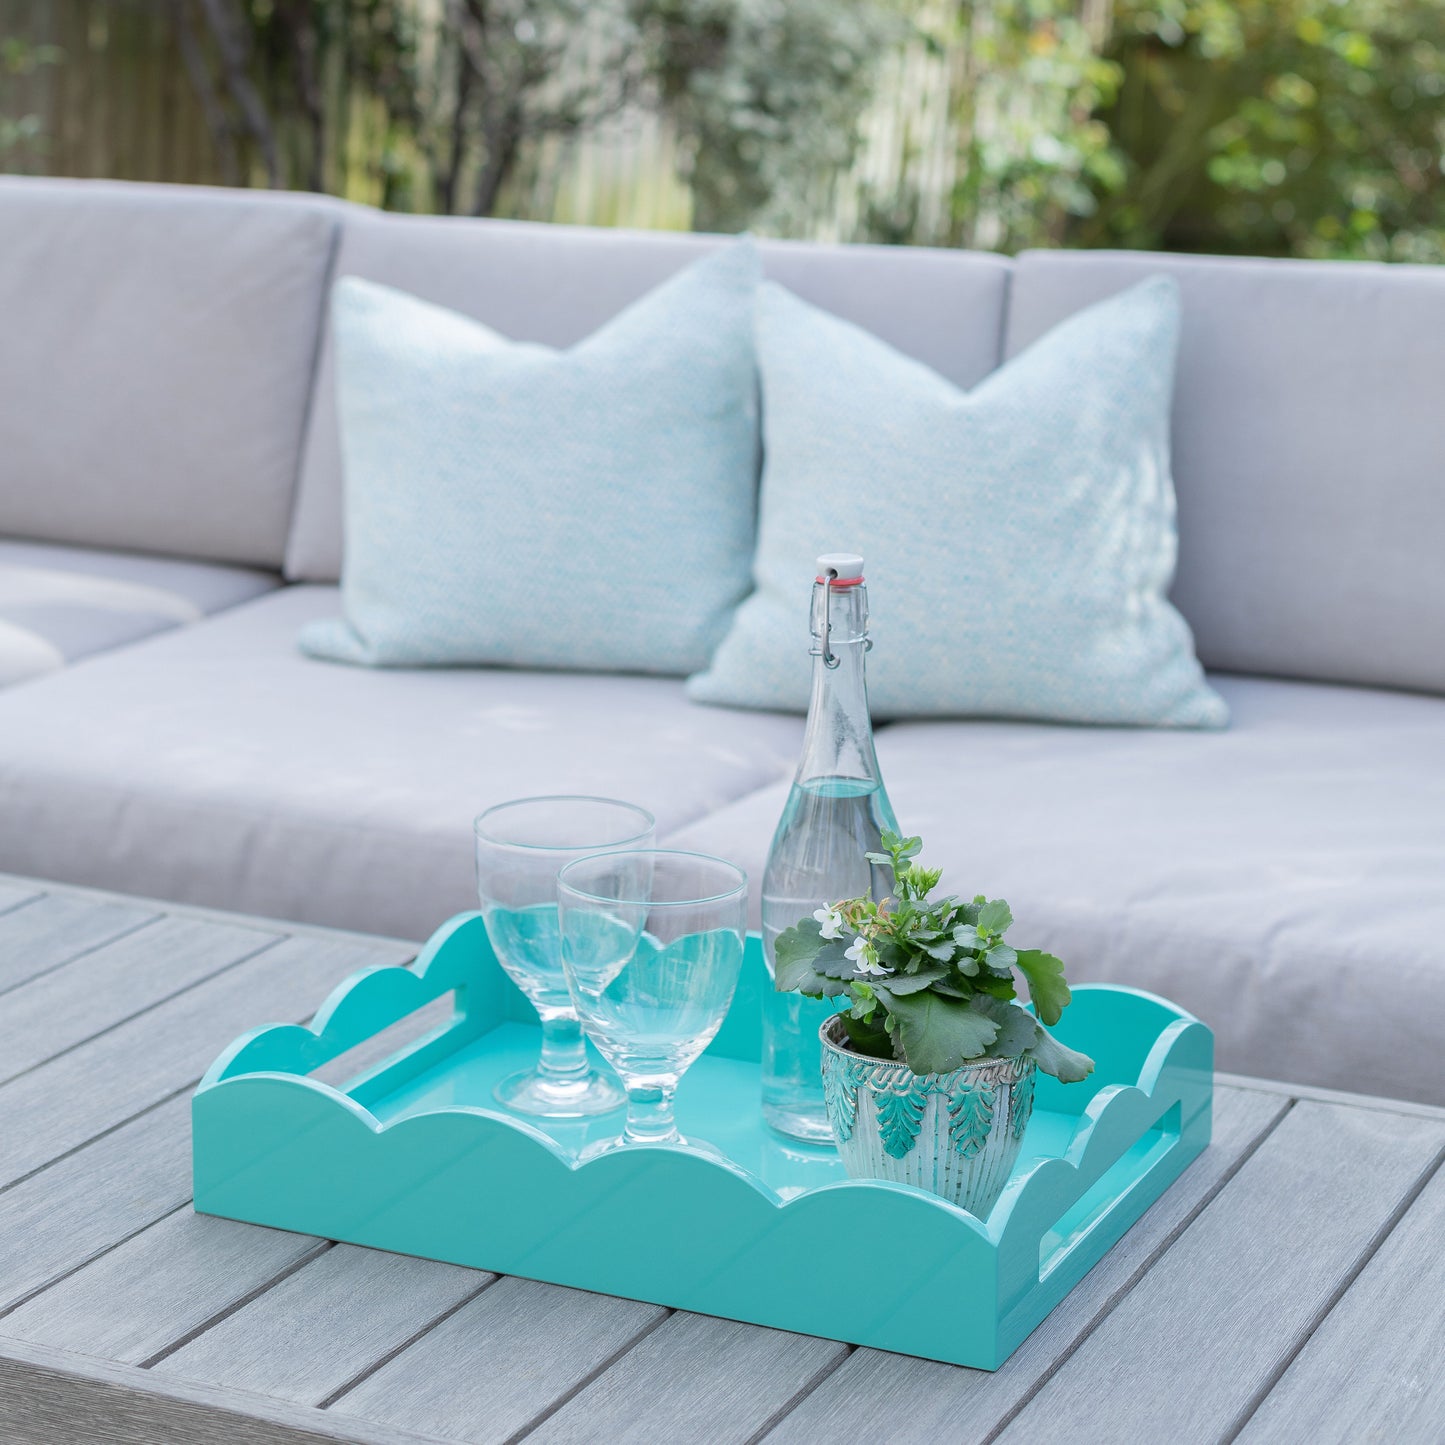 Turquoise Medium Lacquered Scallop Serving Tray